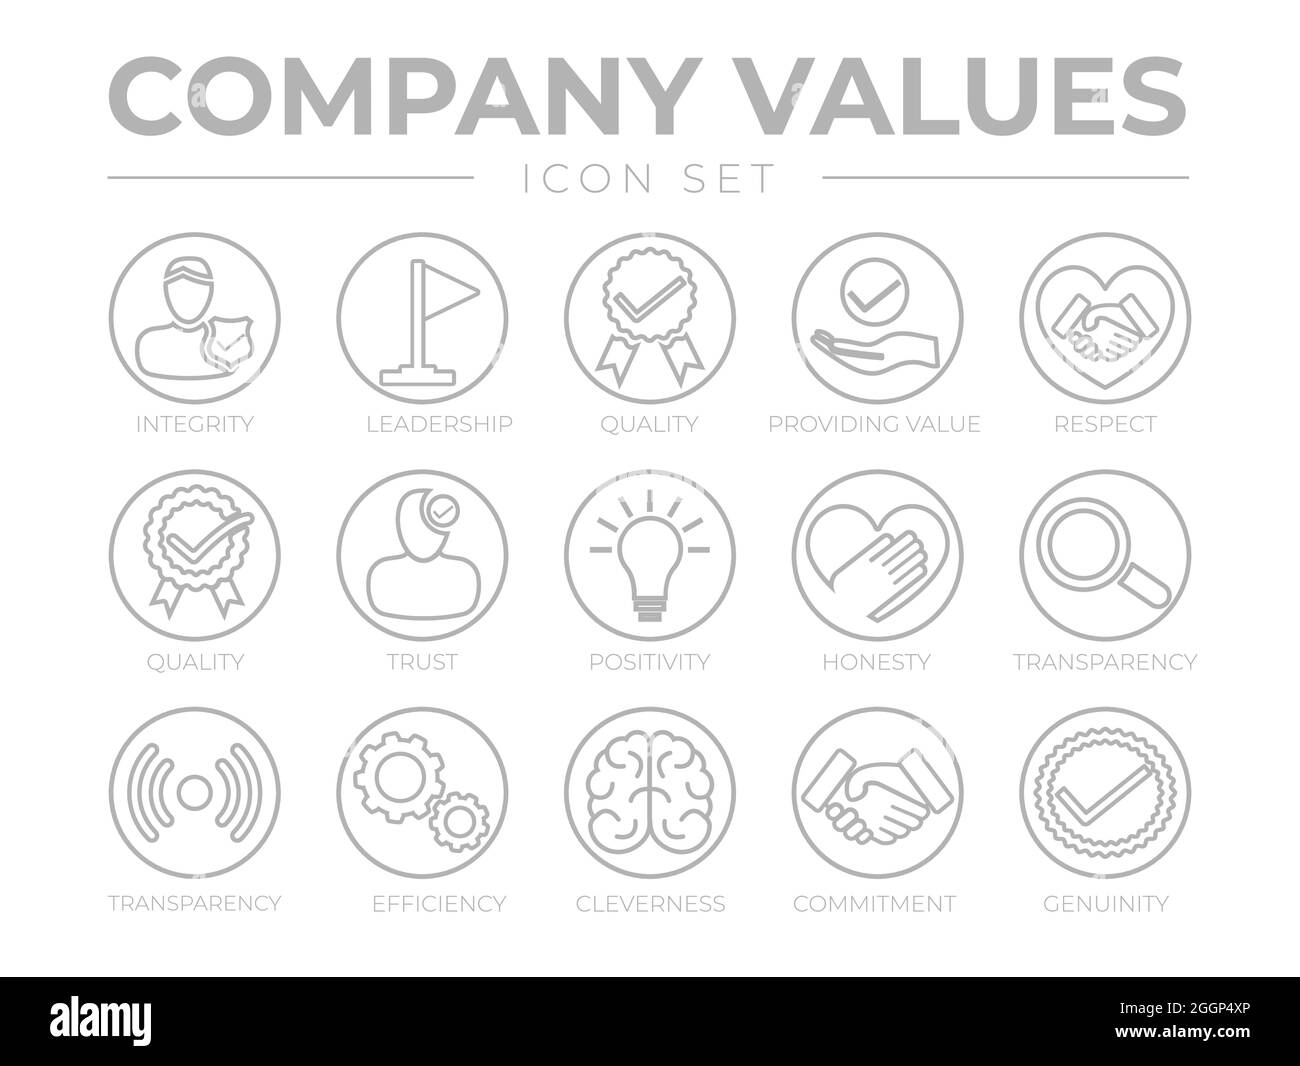 Thin Outline Company Values Round Gray Icon Set. Integrity, Leadership, Quality, Value, Respect, Trust, Positivity, Honesty, Transparency, Efficiency, Stock Vector